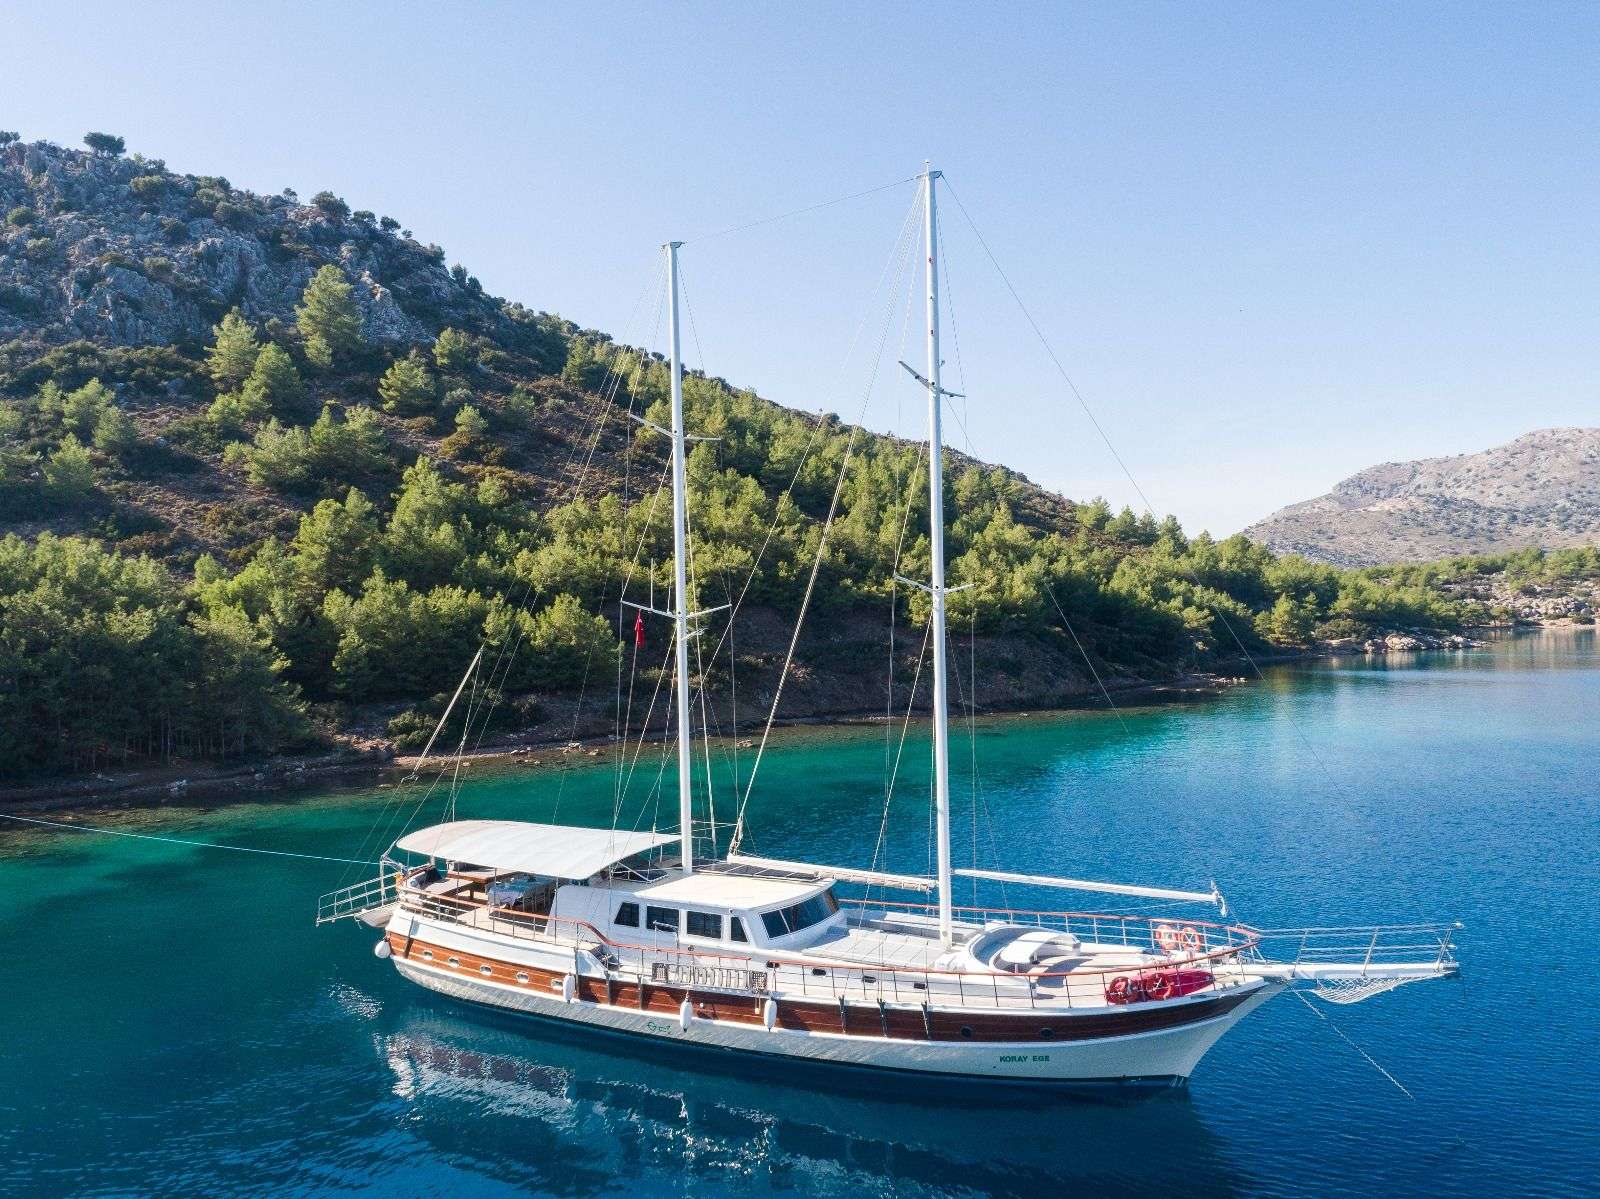 koray ege - Superyacht charter Saint Vincent and the Grenadines & Boat hire in Greece & Turkey 1